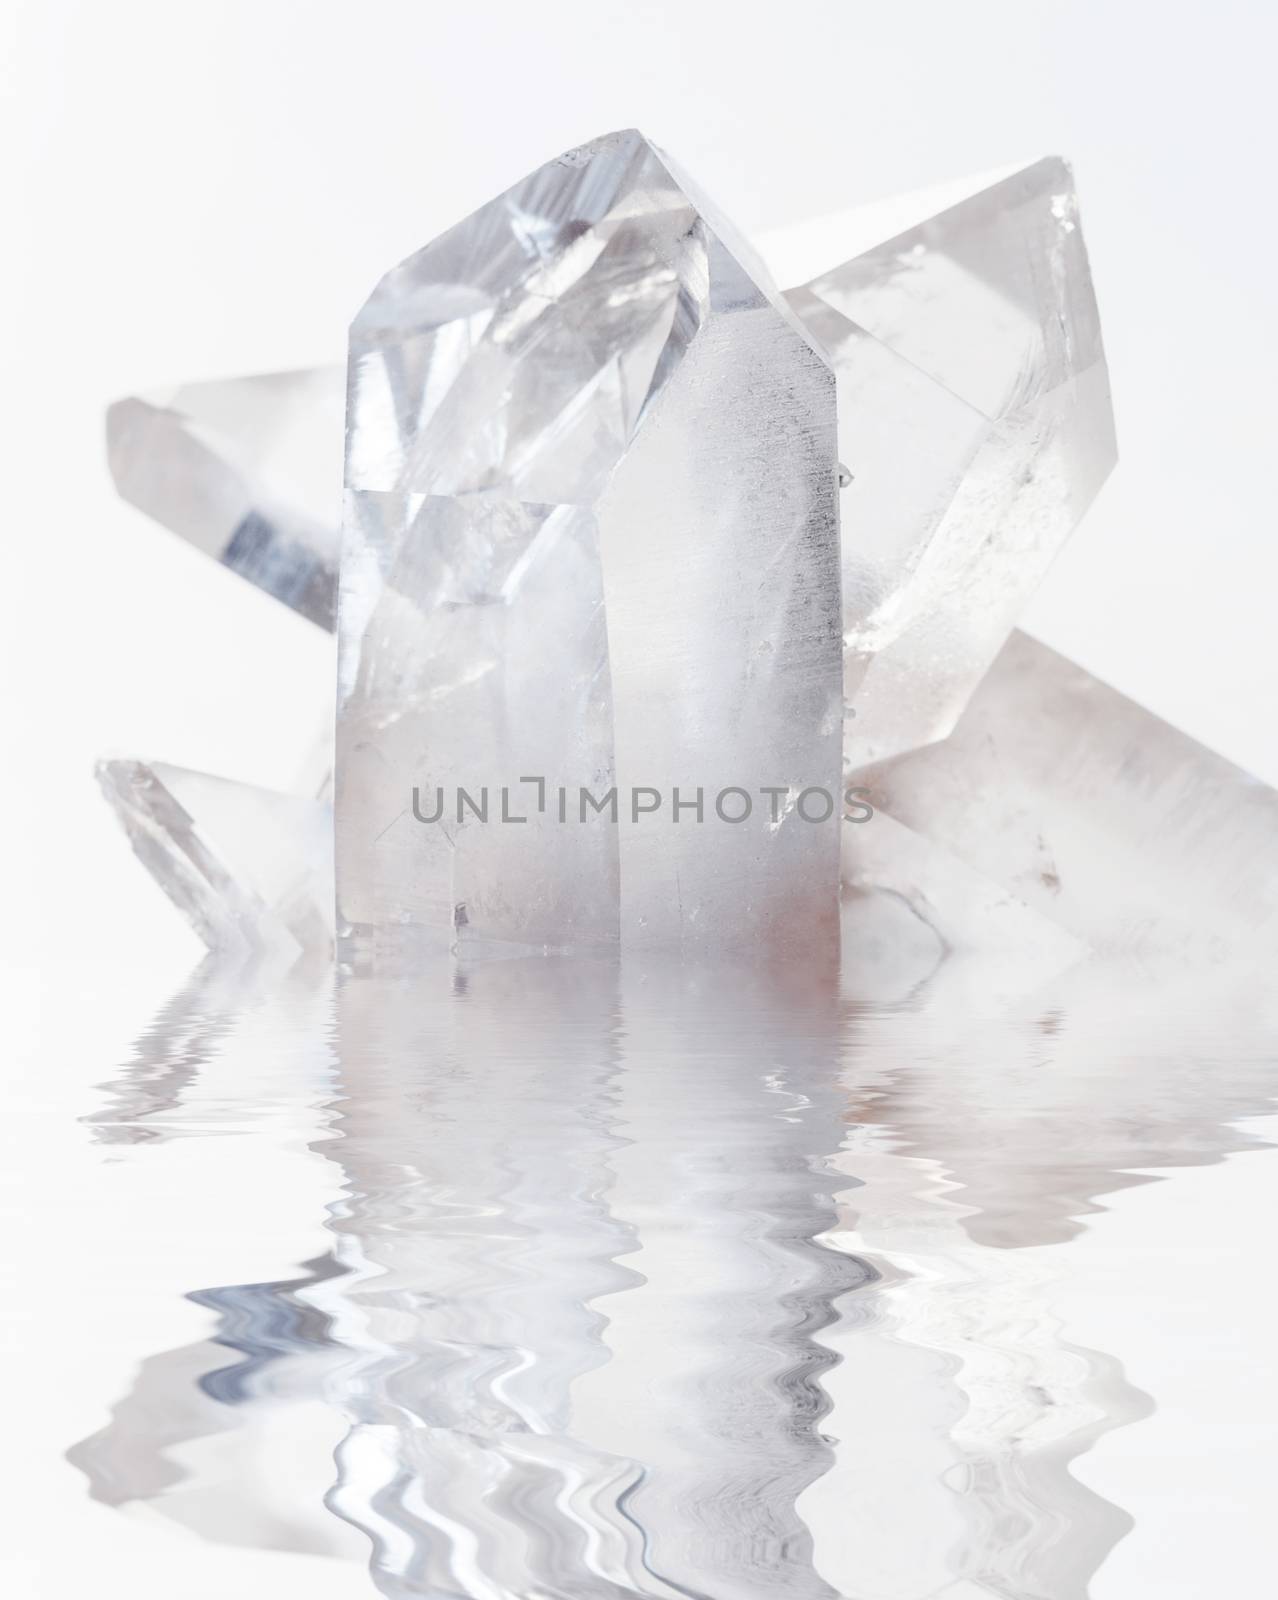 Cluster of several transparent quartz crystals close-up on a white background reflected in a water surface with small waves